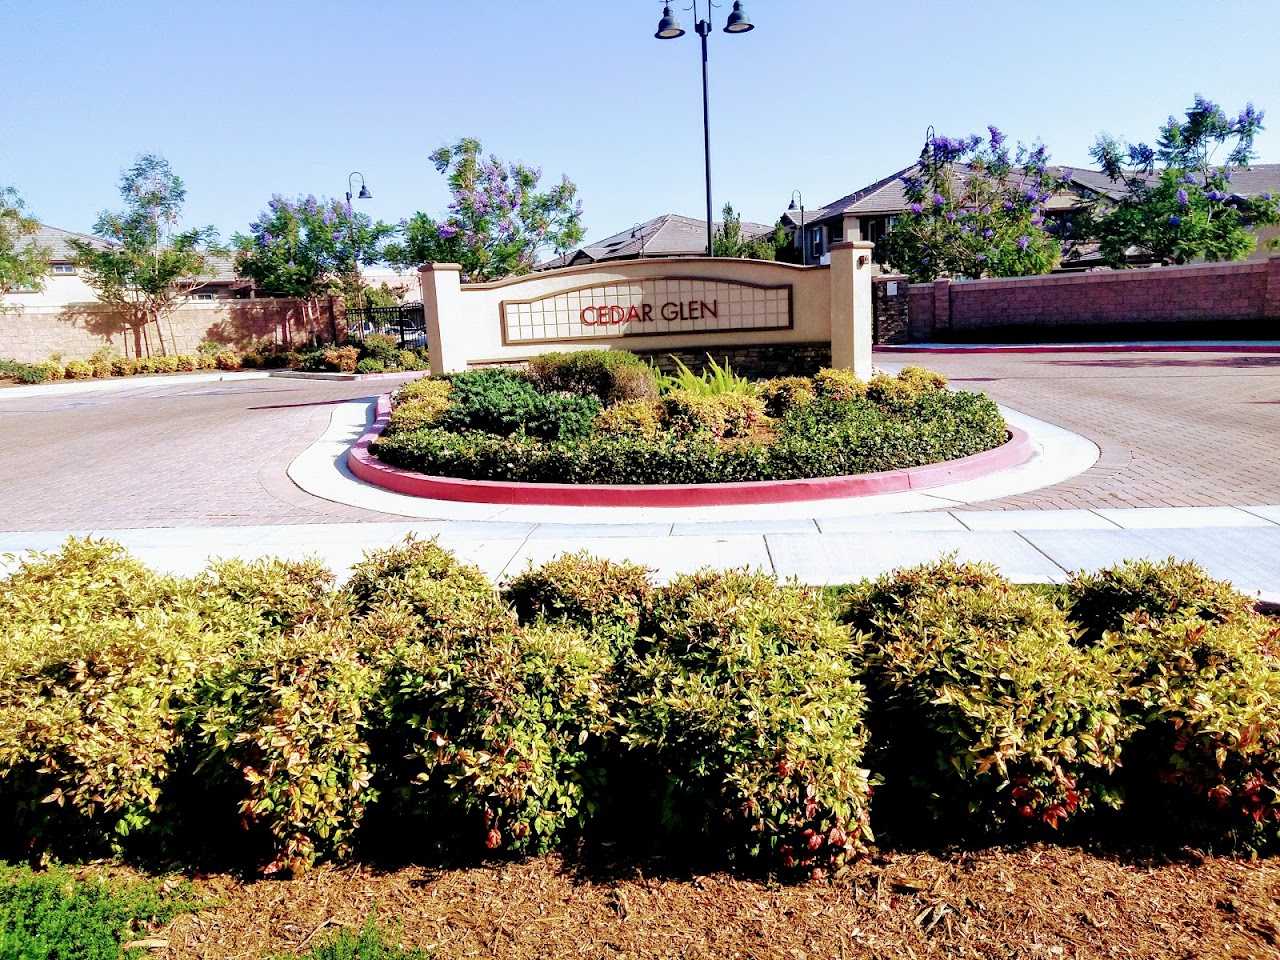 Photo of CEDAR GLEN II APARTMENTS. Affordable housing located at 9830 COUNTY FARM ROAD RIVERSIDE, CA 92503